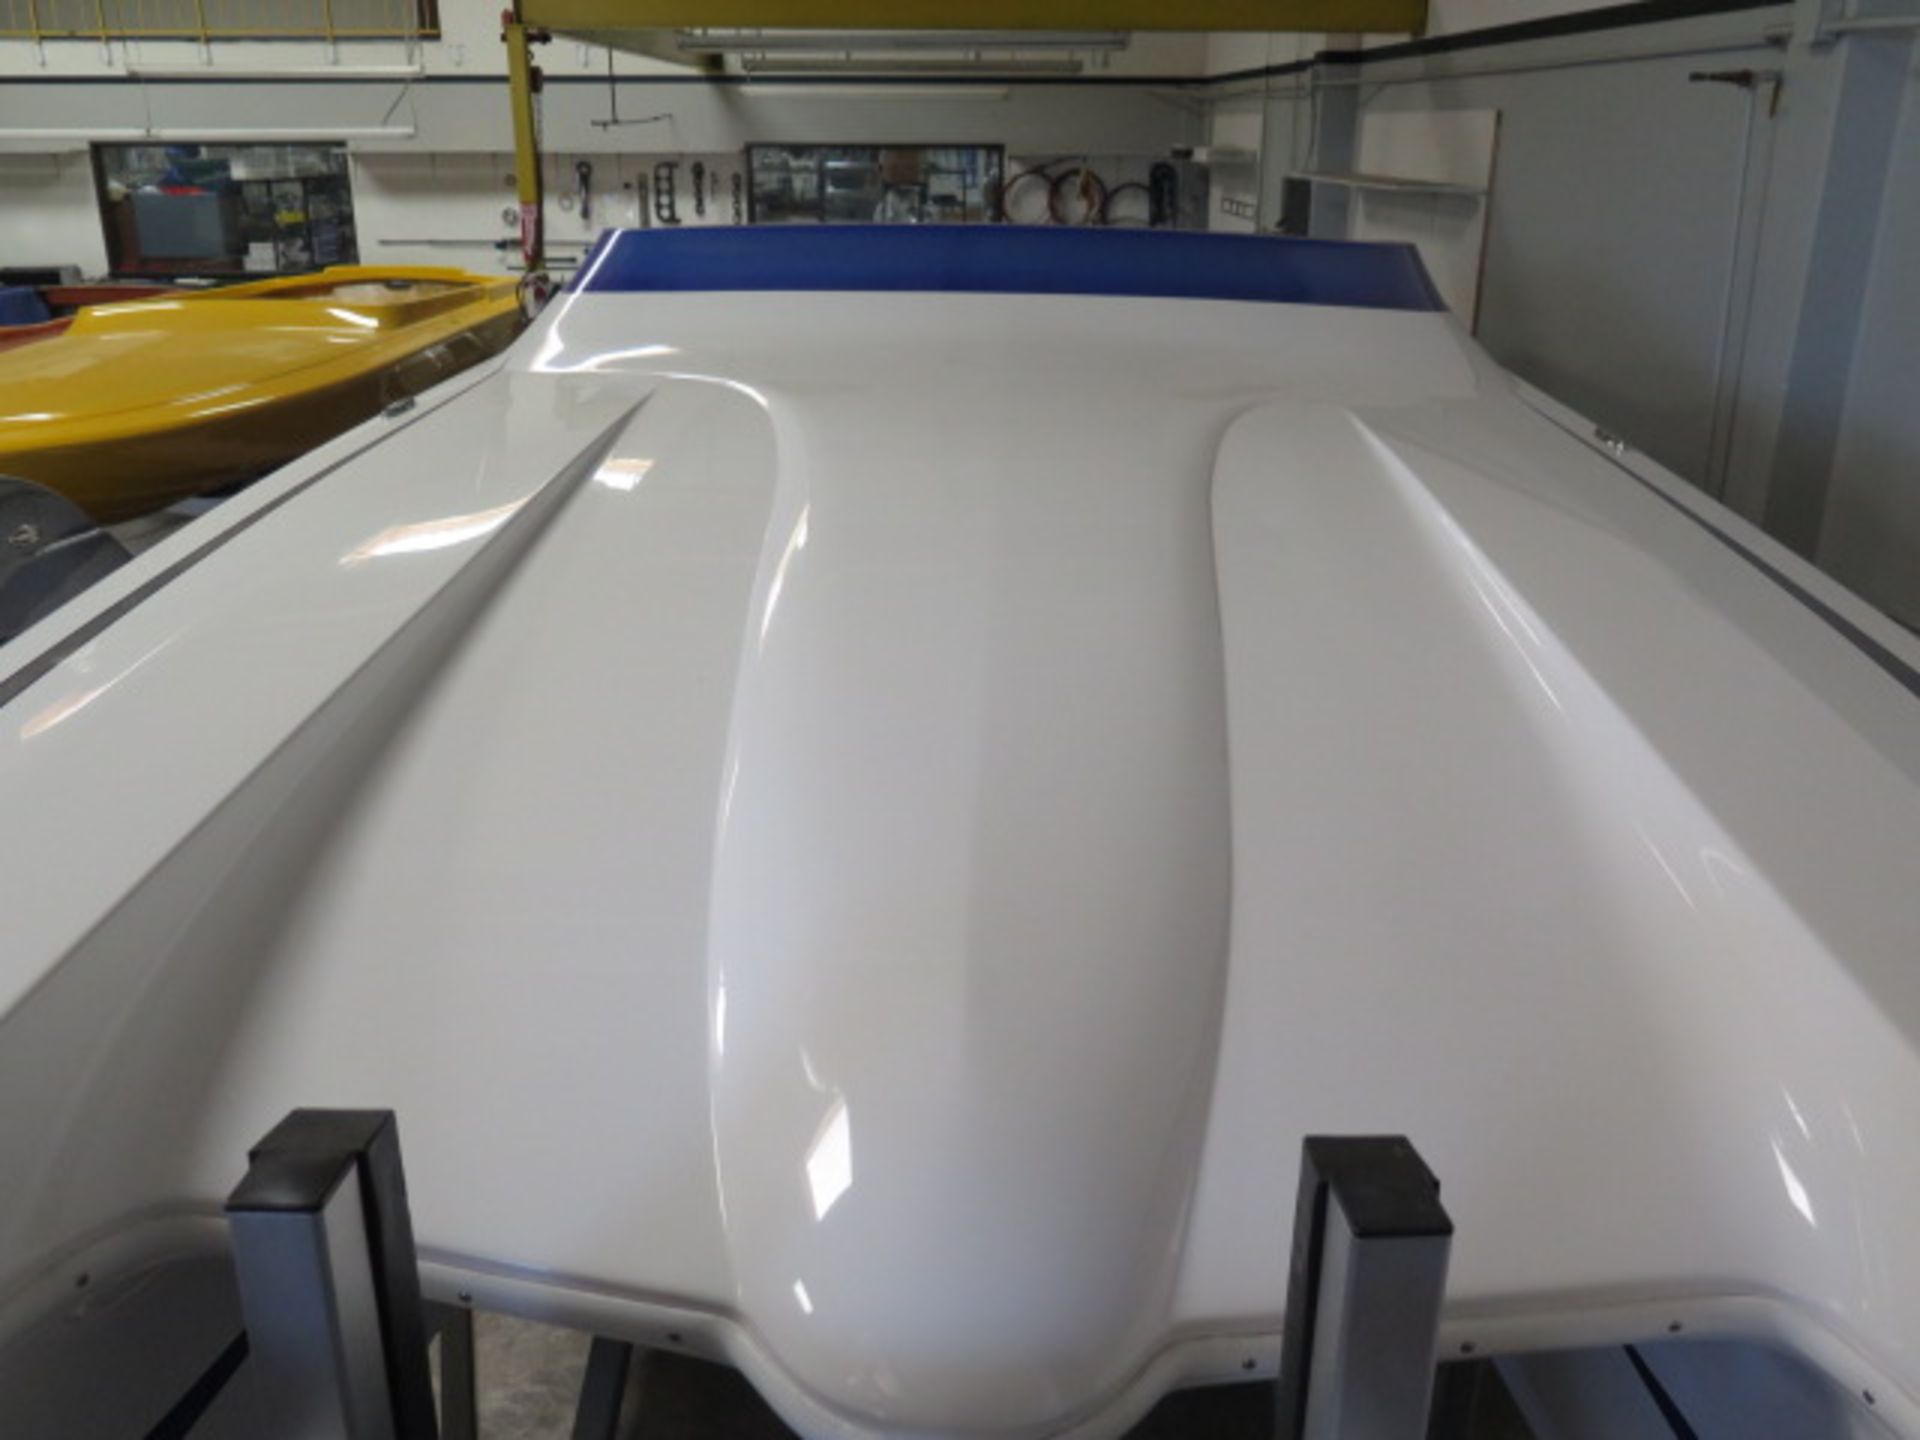 2022 27' Ultra Shadow Balsa Core CAT Hull Built for High Speed,w/Finished Bilge Gel Coat, SOLD AS IS - Image 14 of 21